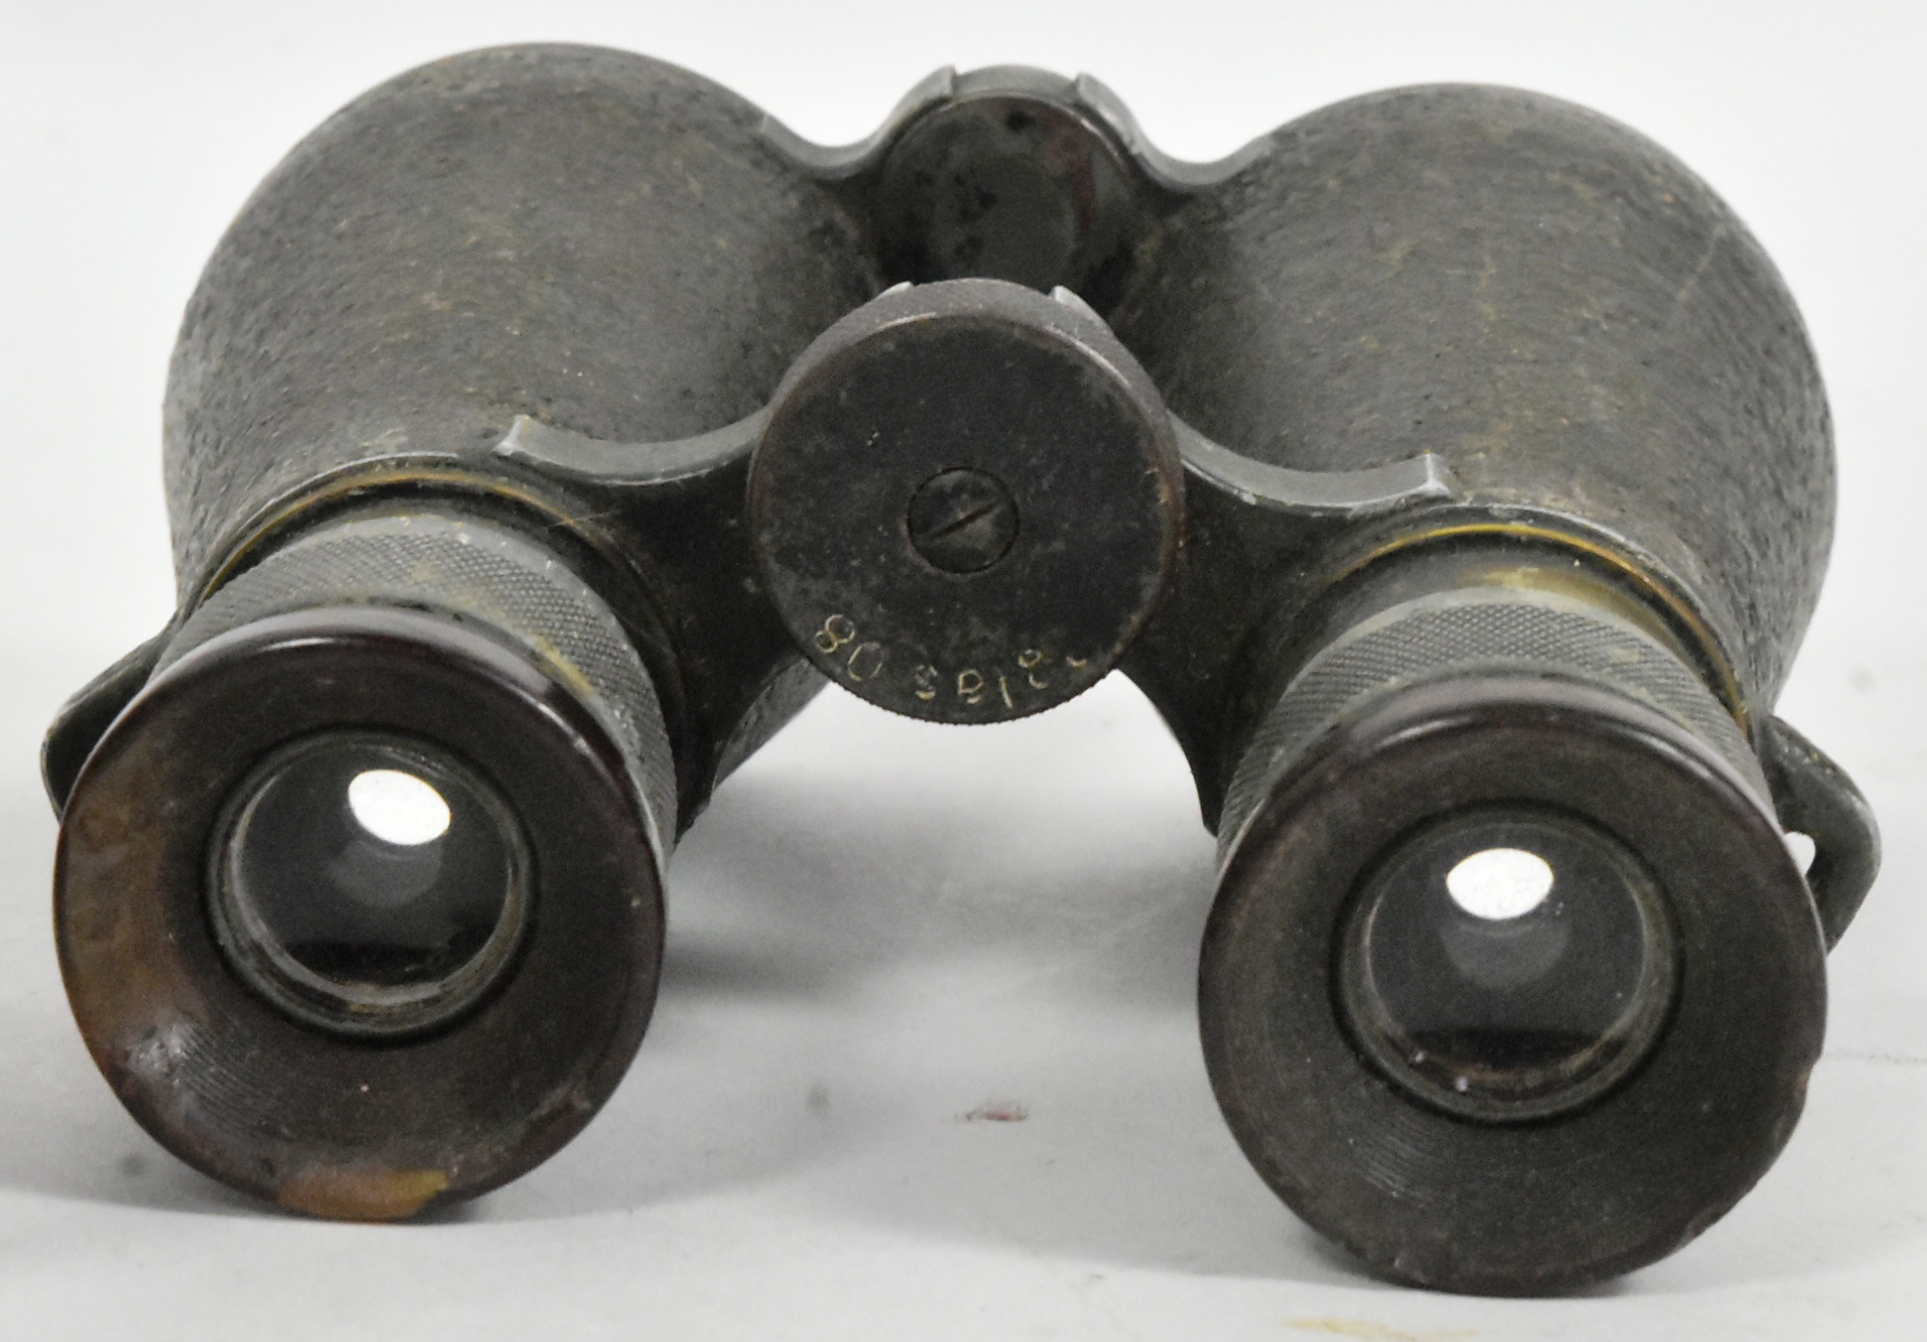 TWO PAIRS OF EARLY 20TH CENTURY BINOCULARS - Image 6 of 6